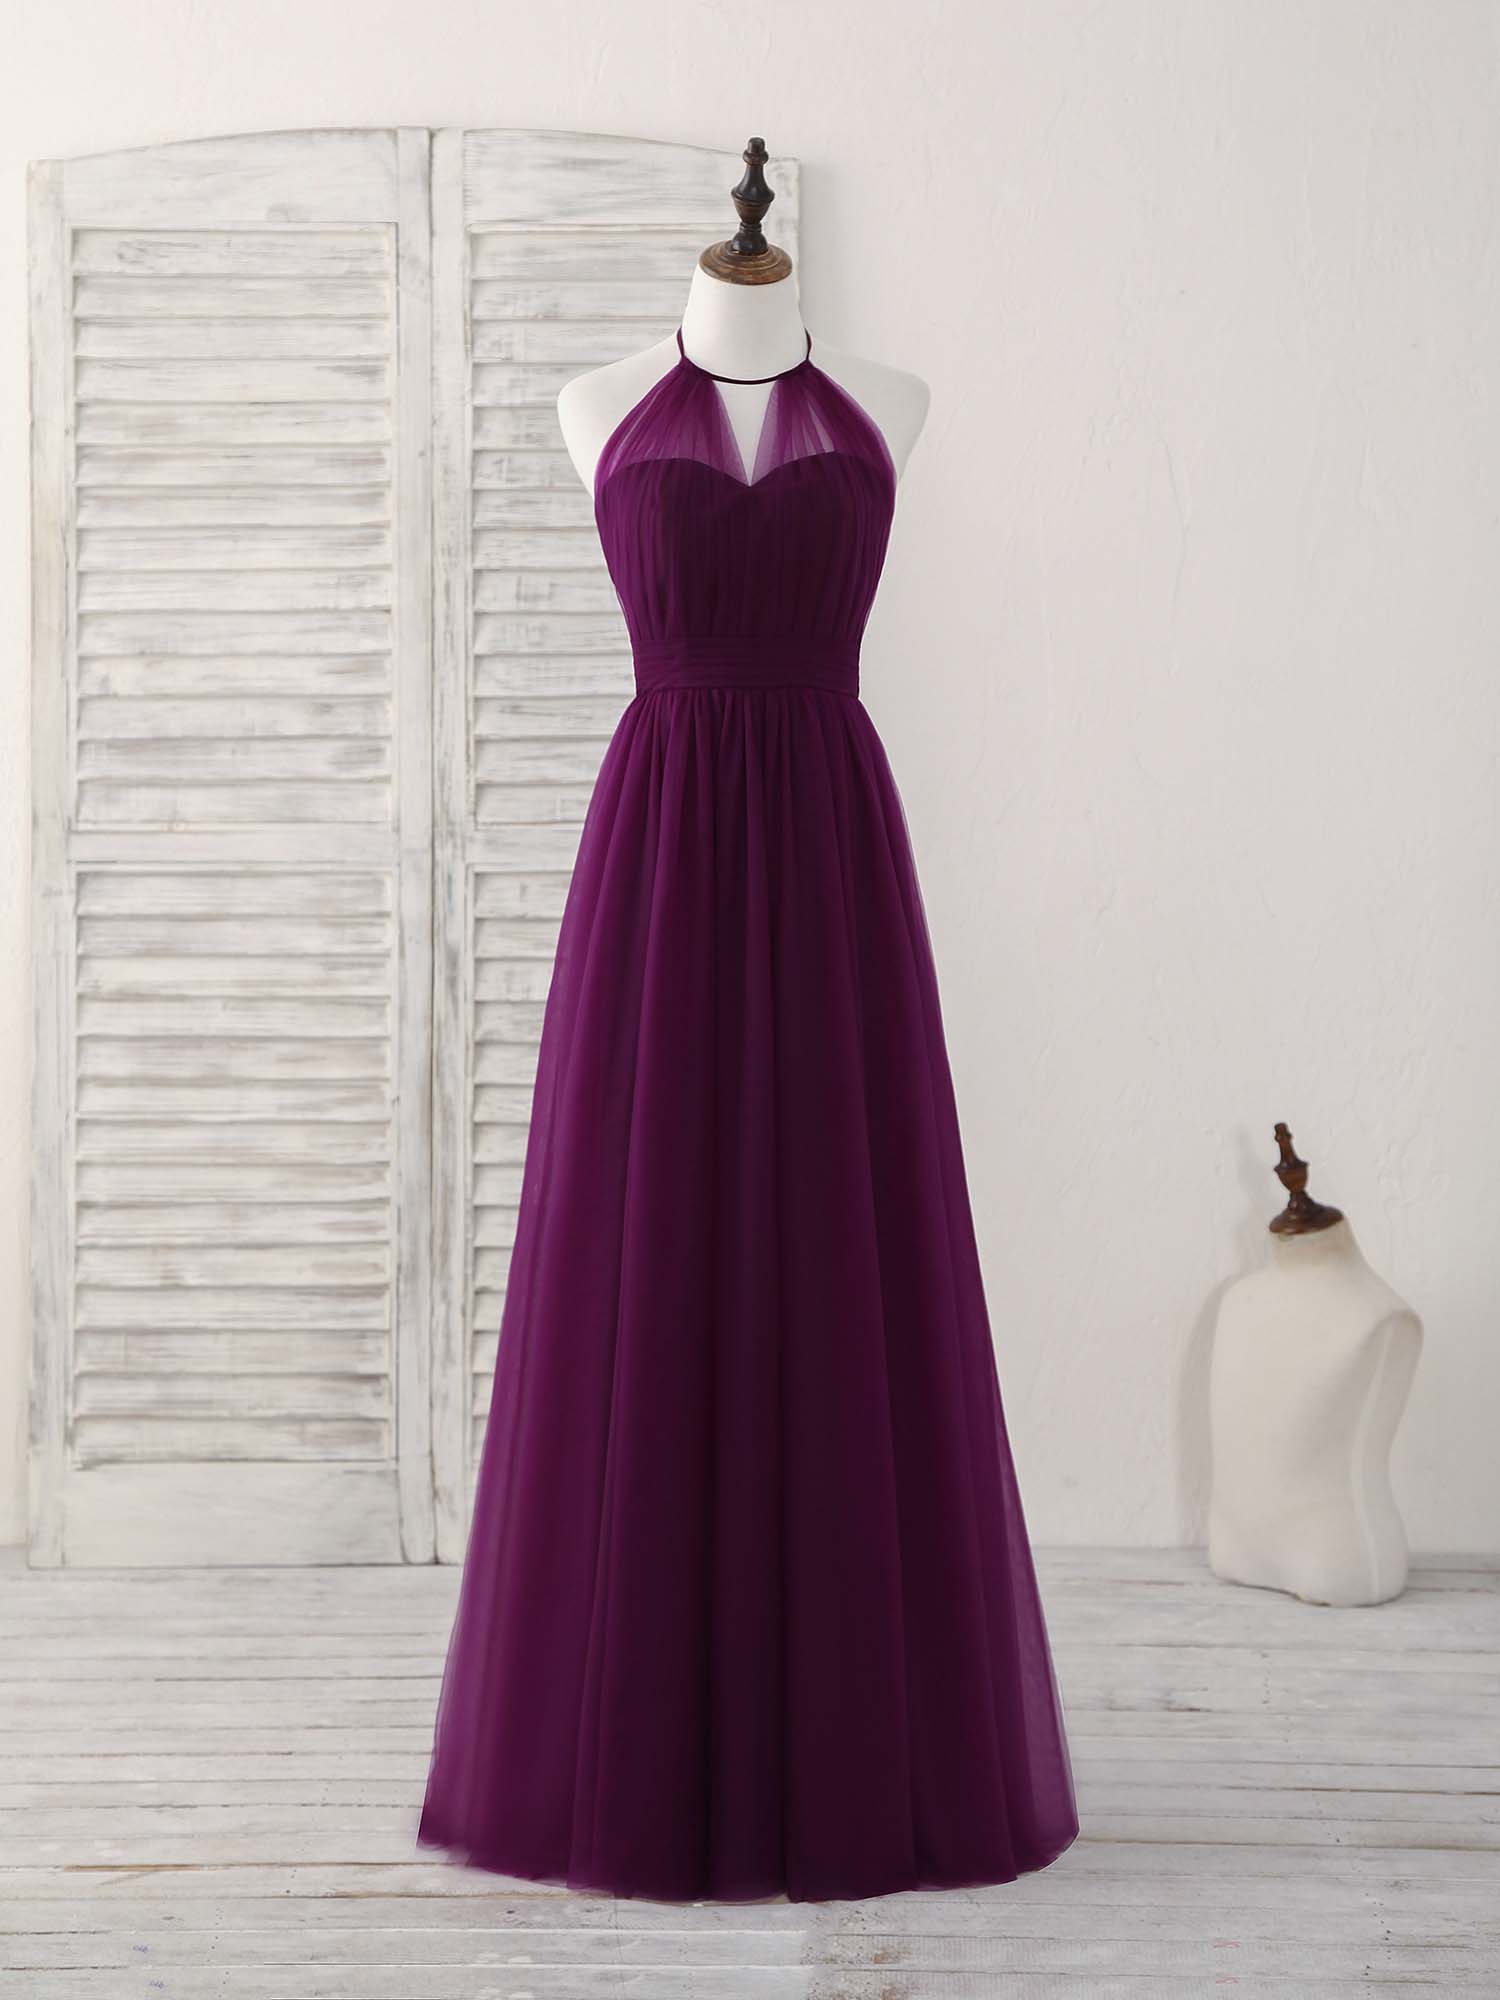 Simple Tulle A-Line Purple Long Prom Dress Outfits For Girls, Bridesmaid Dress